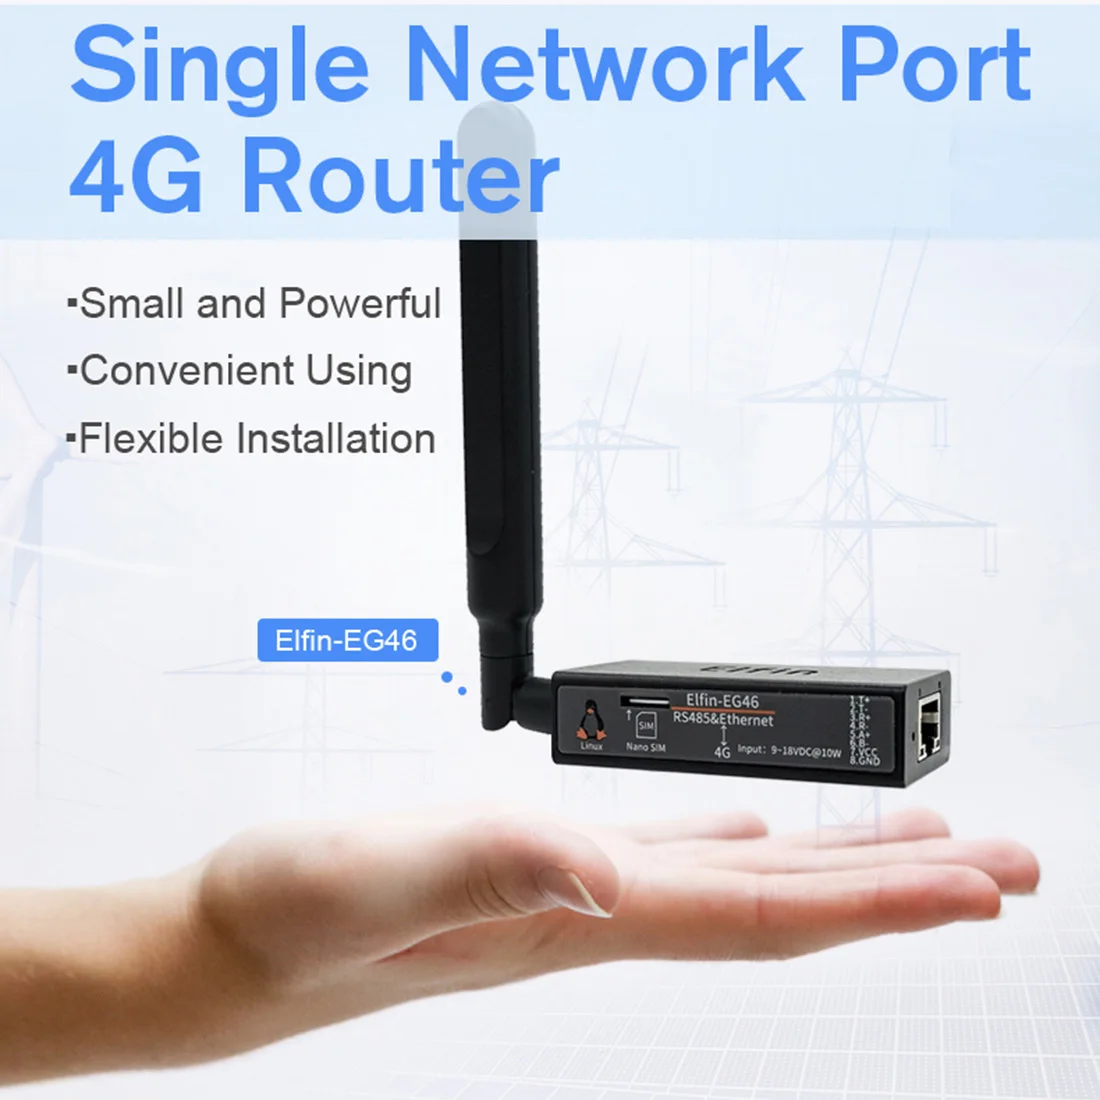 Elfin-EG46 4G Router RS485 & Ethernet to 4G Network Port Connect 4G Single Network Port 4G DTU Router with 1 to 8 Pin Connector